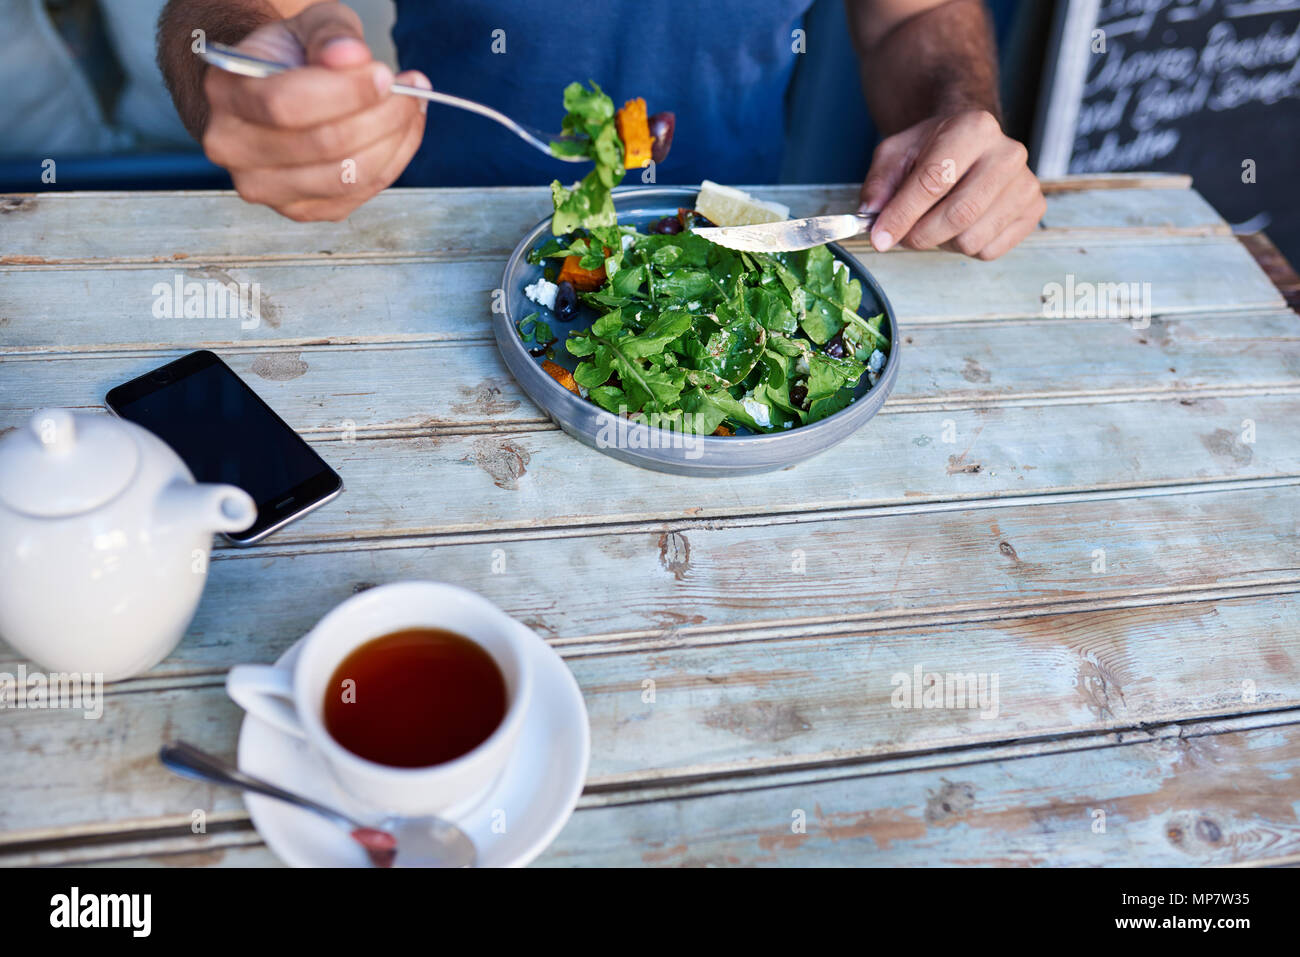 Man sitting at a rustic wooden table eating delicious salad  Stock Photo